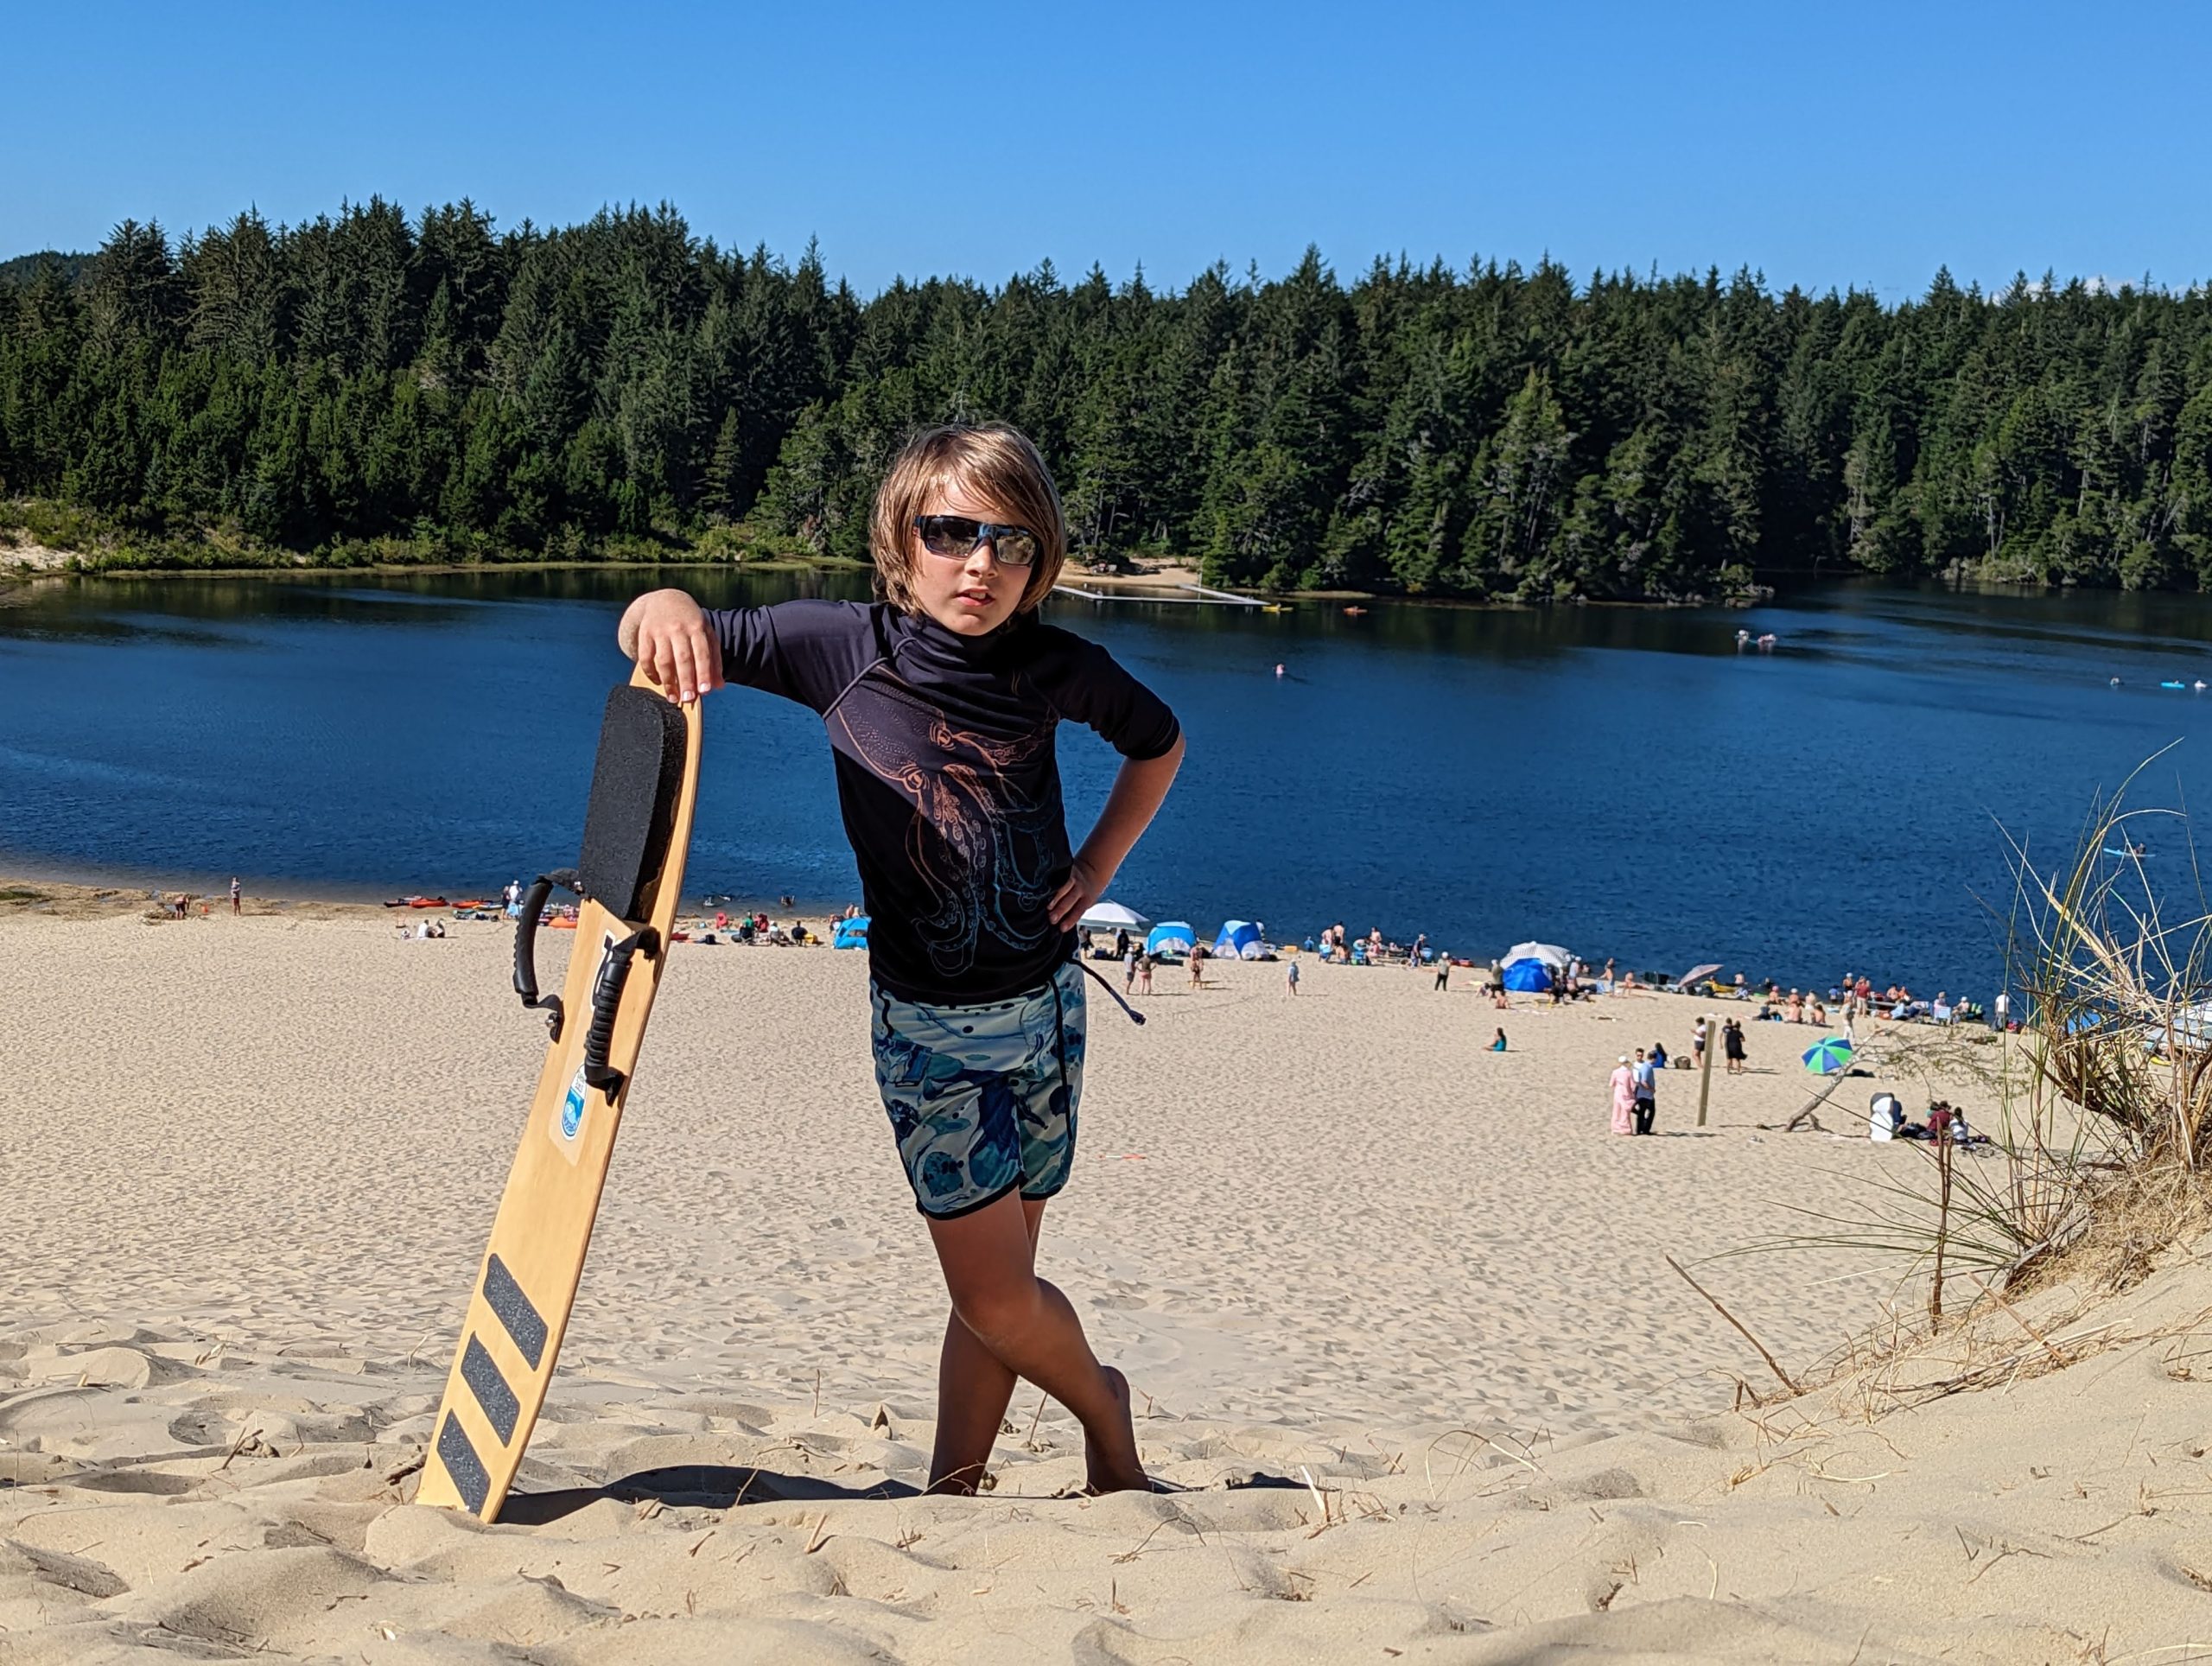 Janis's son leaning on a sandboard at a lake.